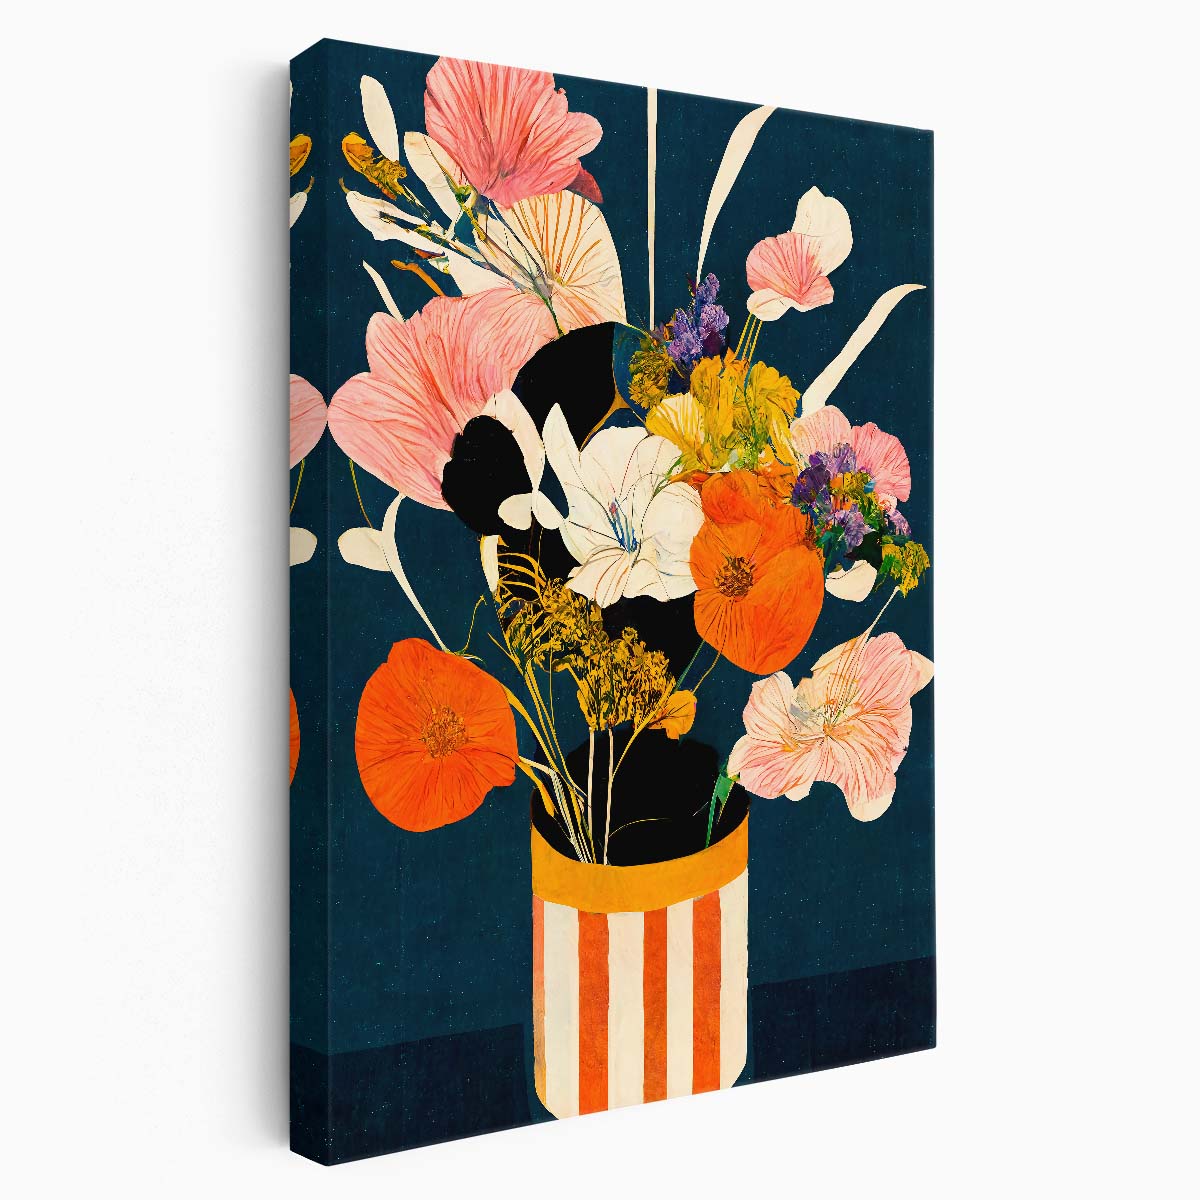 Japandi Style Colorful Floral Illustration by Treechild by Luxuriance Designs, made in USA